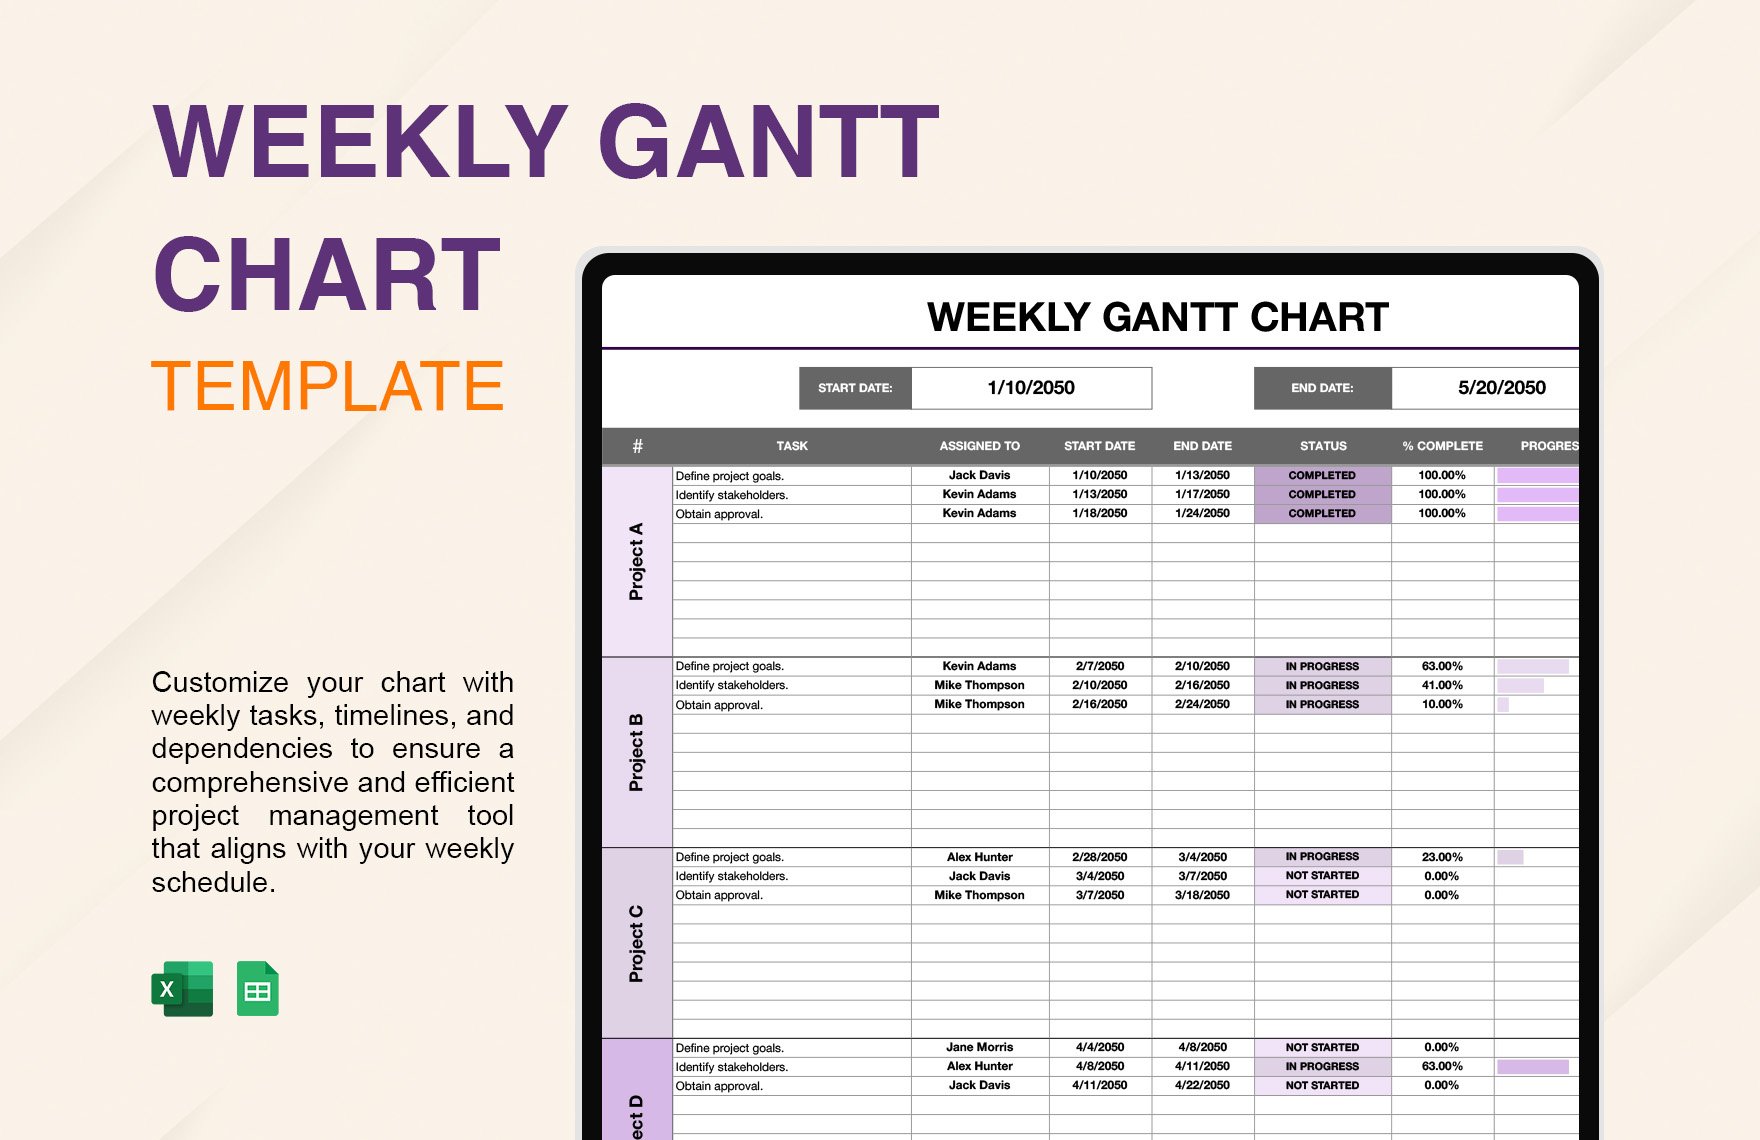 Free Weekly Gantt Chart Template in Excel, Google Sheets